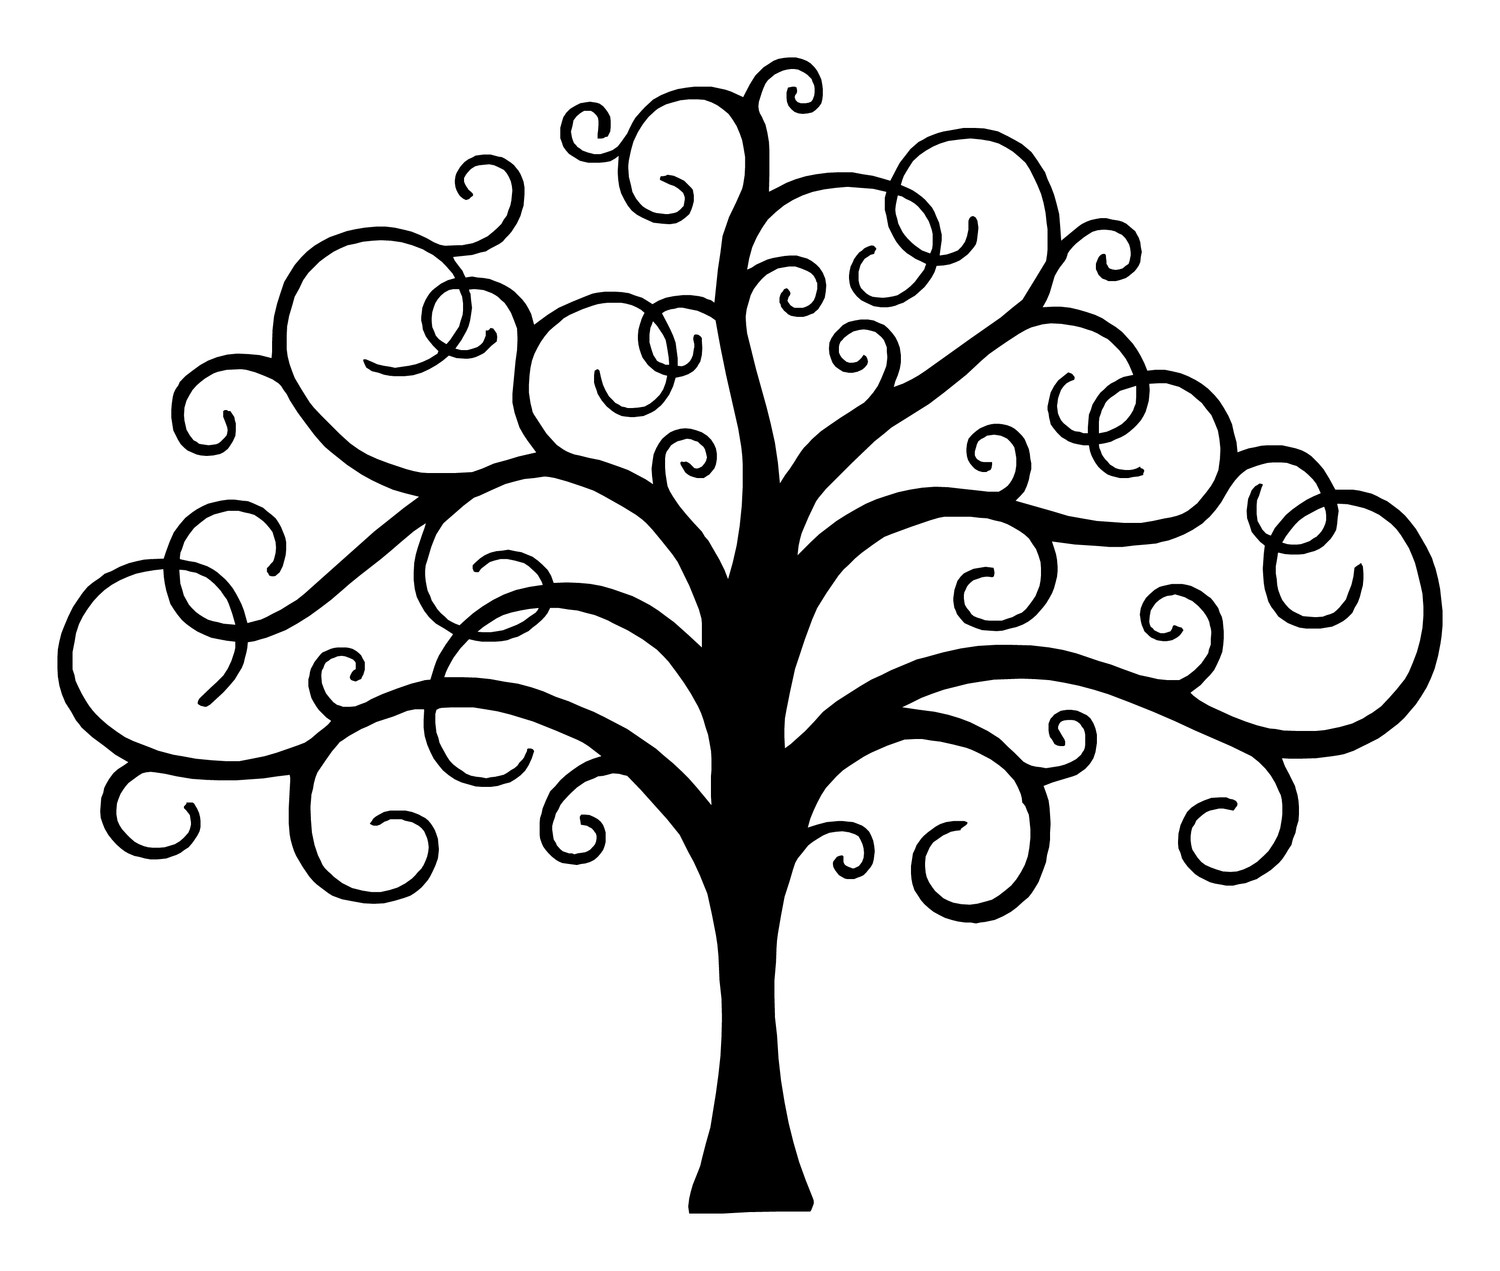 Lds tree of life clipart - Cl